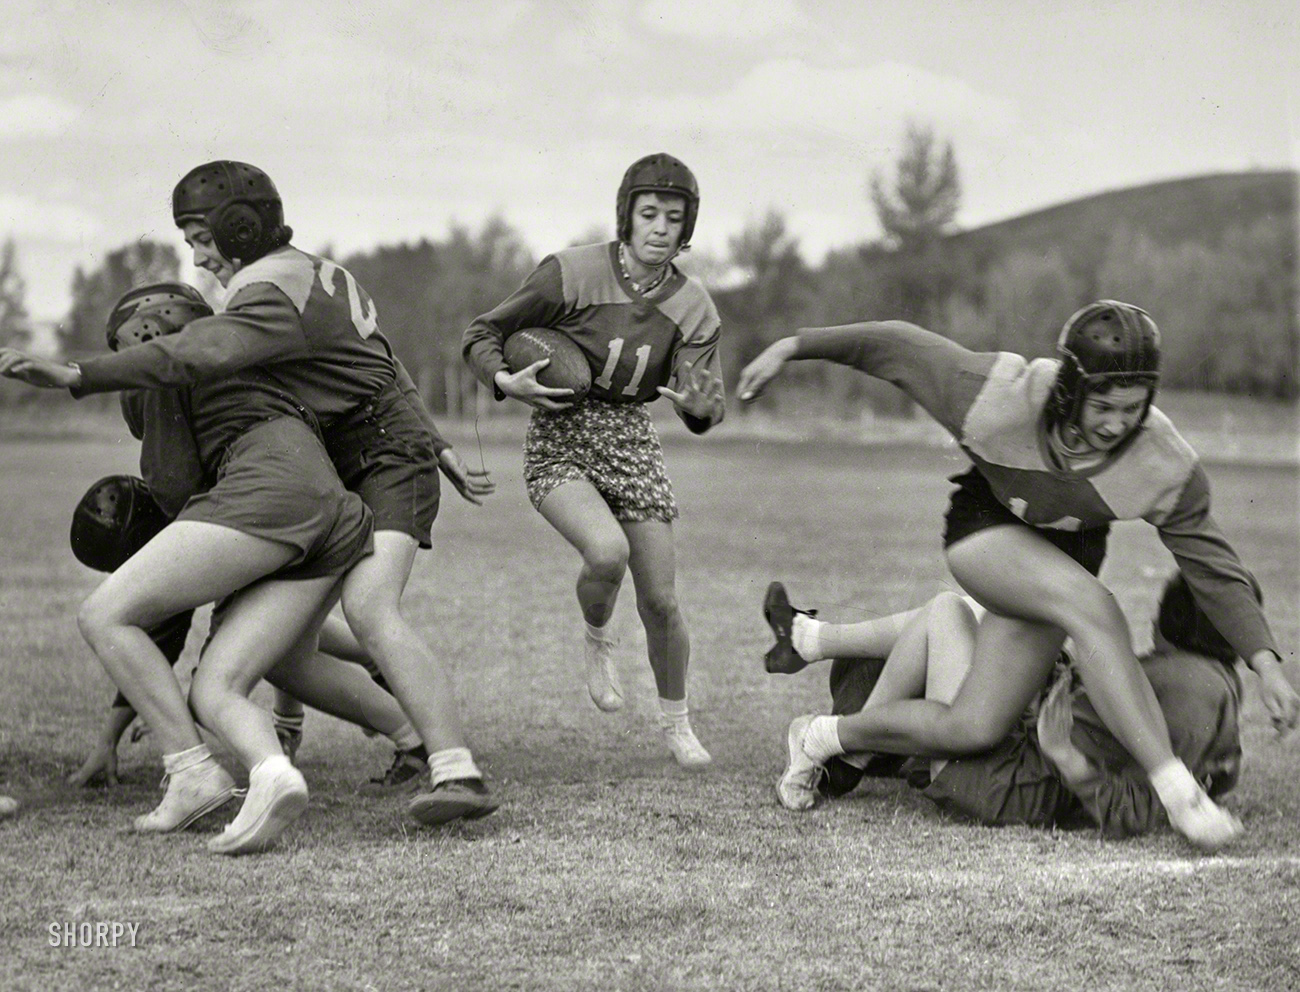 Oct. 14, 1939. "Hit that line, coed! Captain Alice Shanks, carrying football, running behind good interference as the young women from Western State College staged their annual Powder Bowl game on a mountain gridiron in Gunnison, Colorado." New York World-Telegram and Sun Newspaper Photo Collection. View full size.